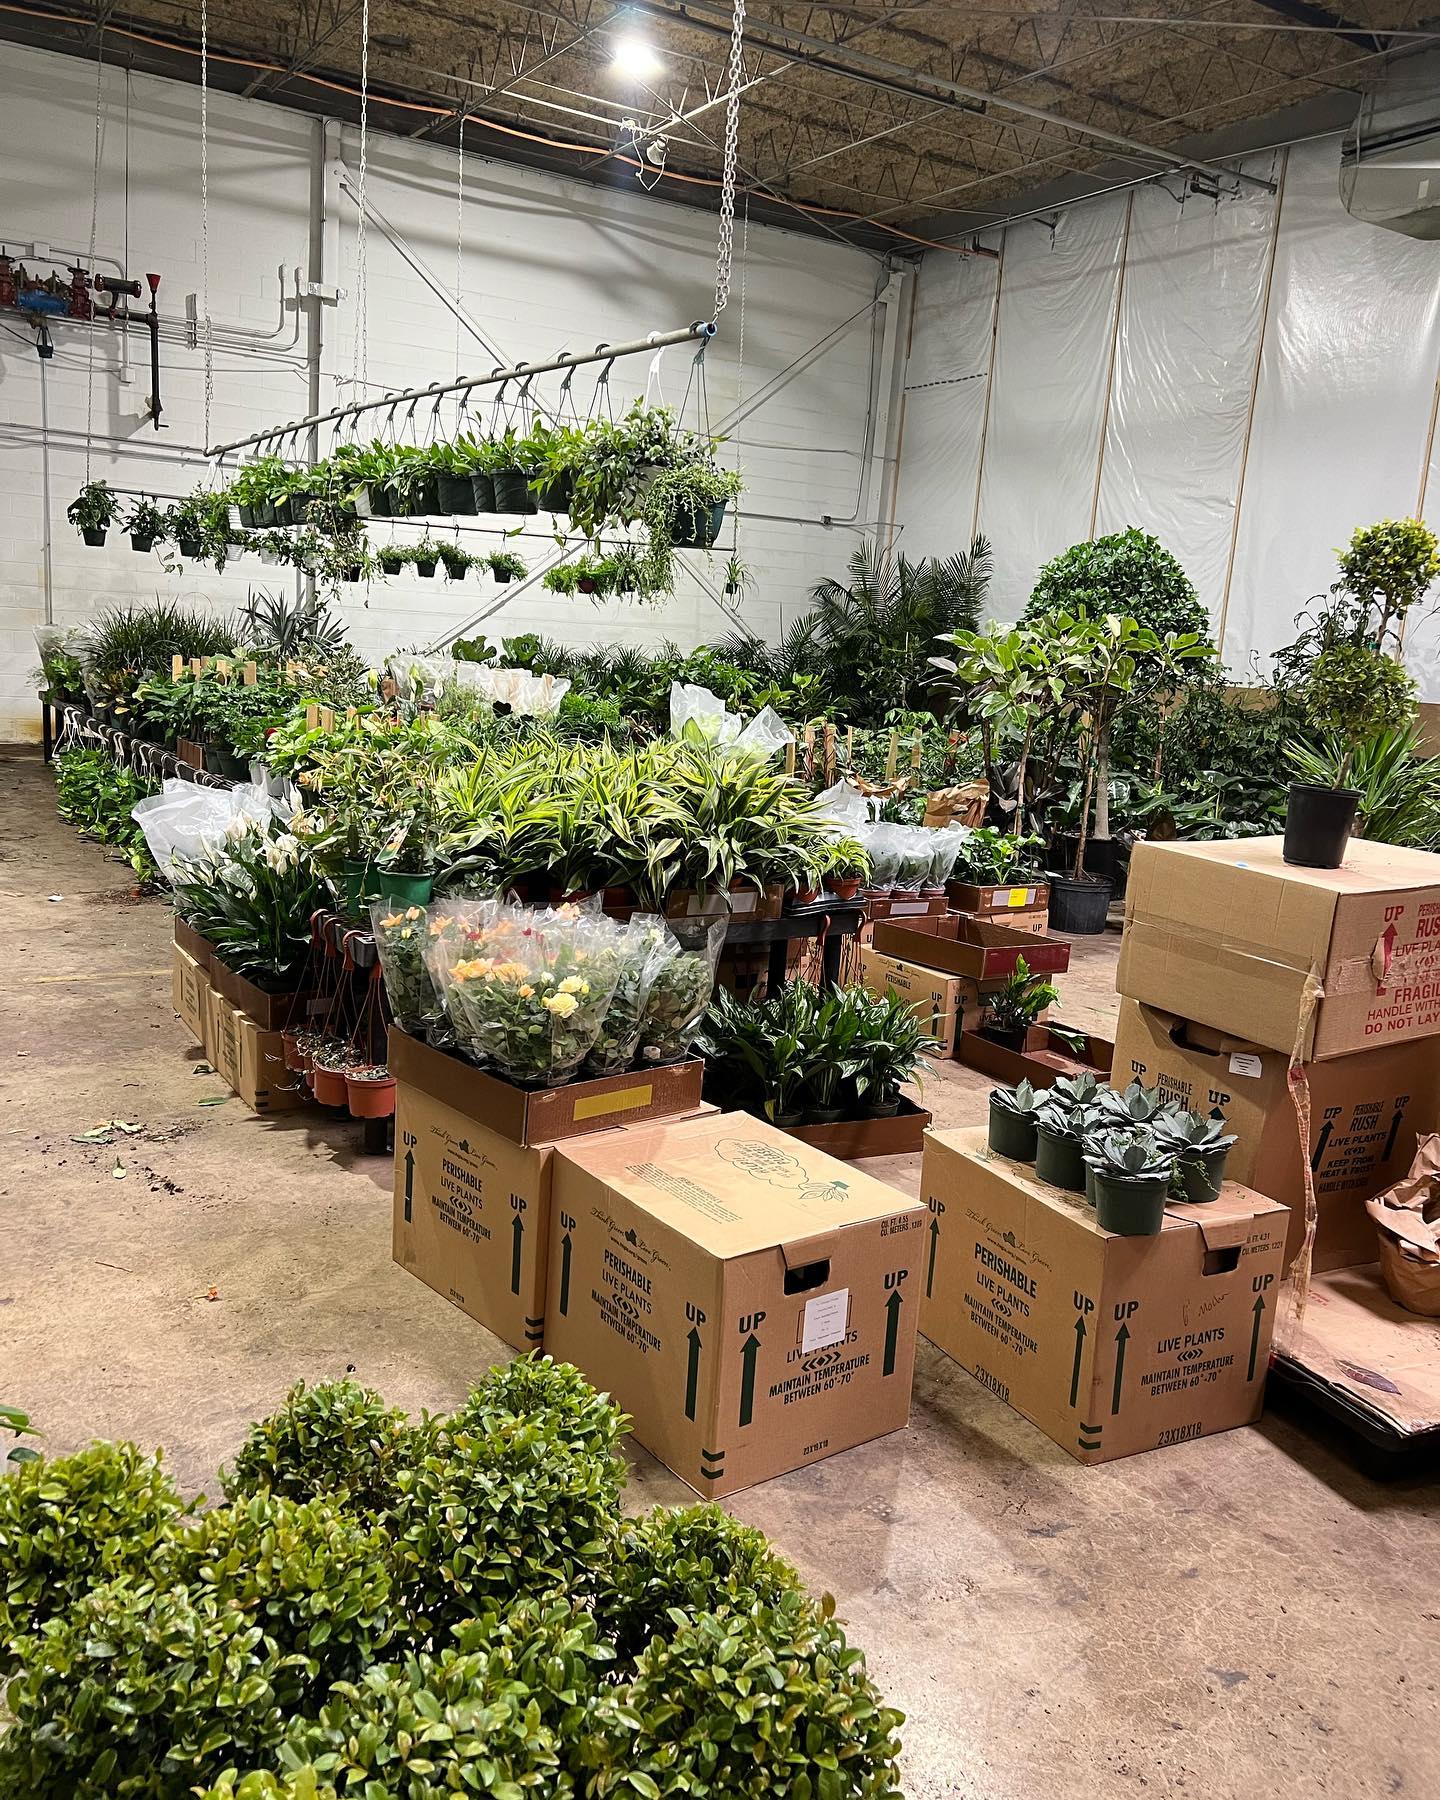 Plant shopping for Mother's Day!  Great gift ideas.